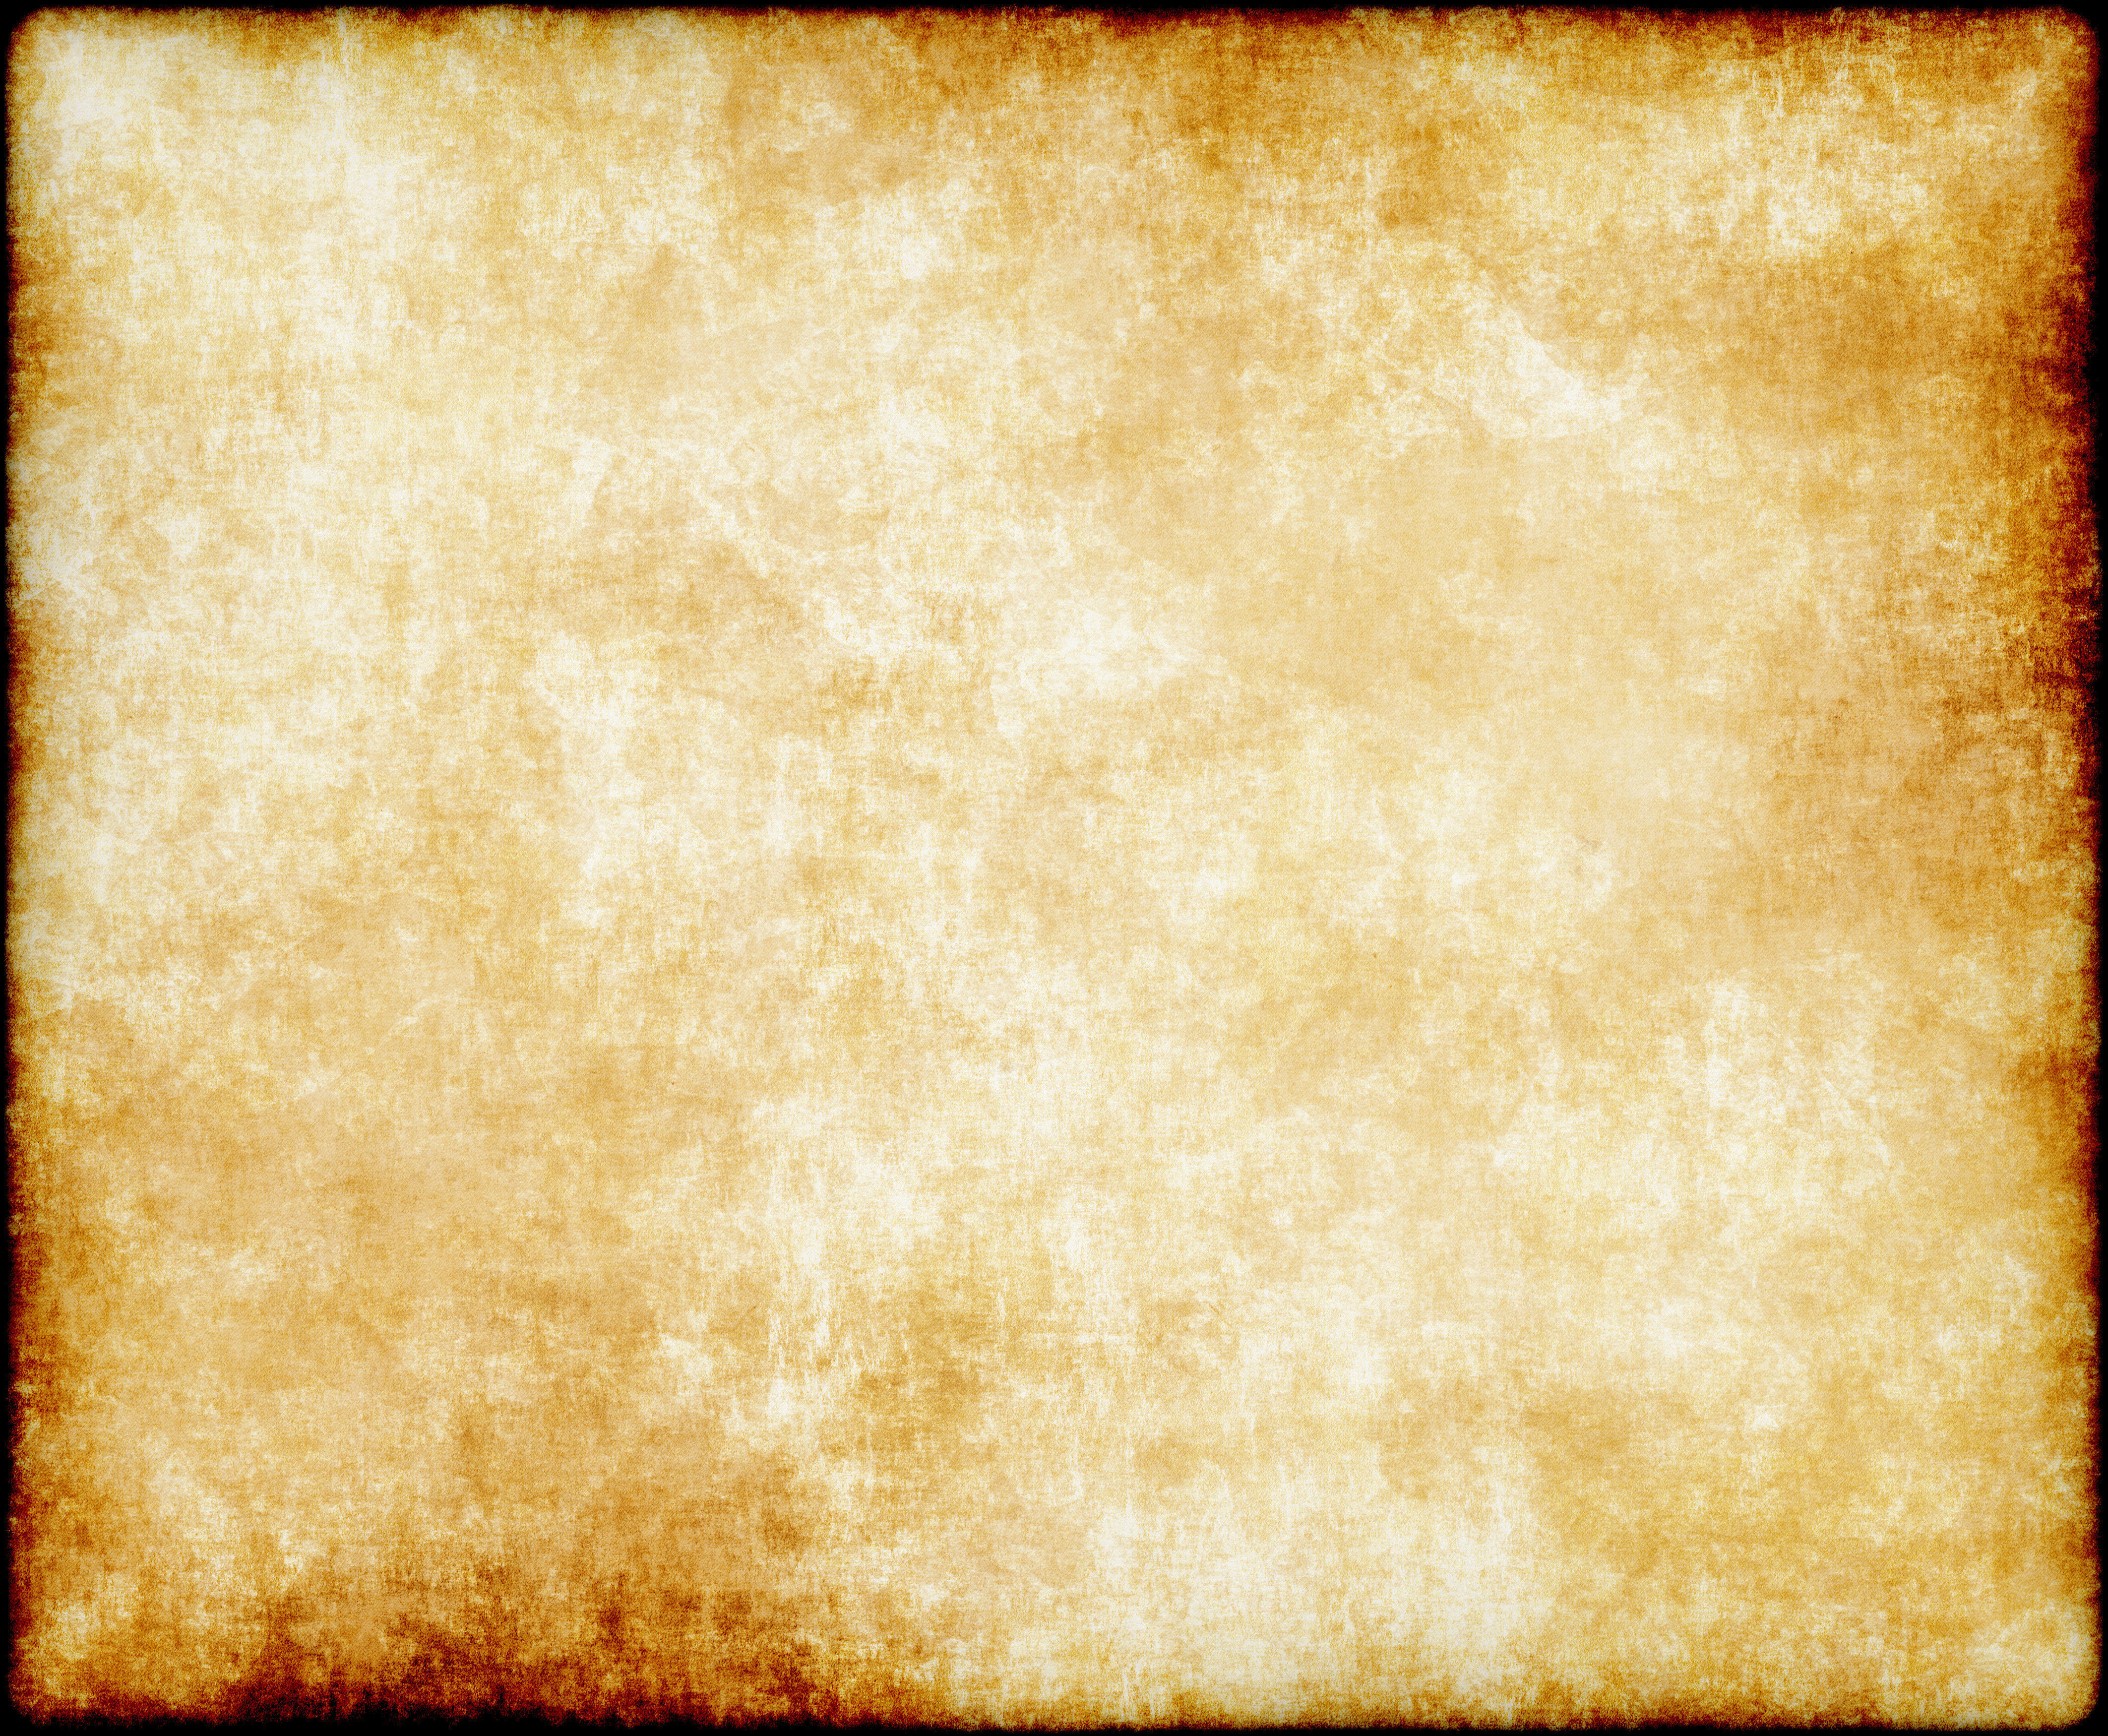 So had a play and made some old vintage wallpaper textures Hope you 4250x3500